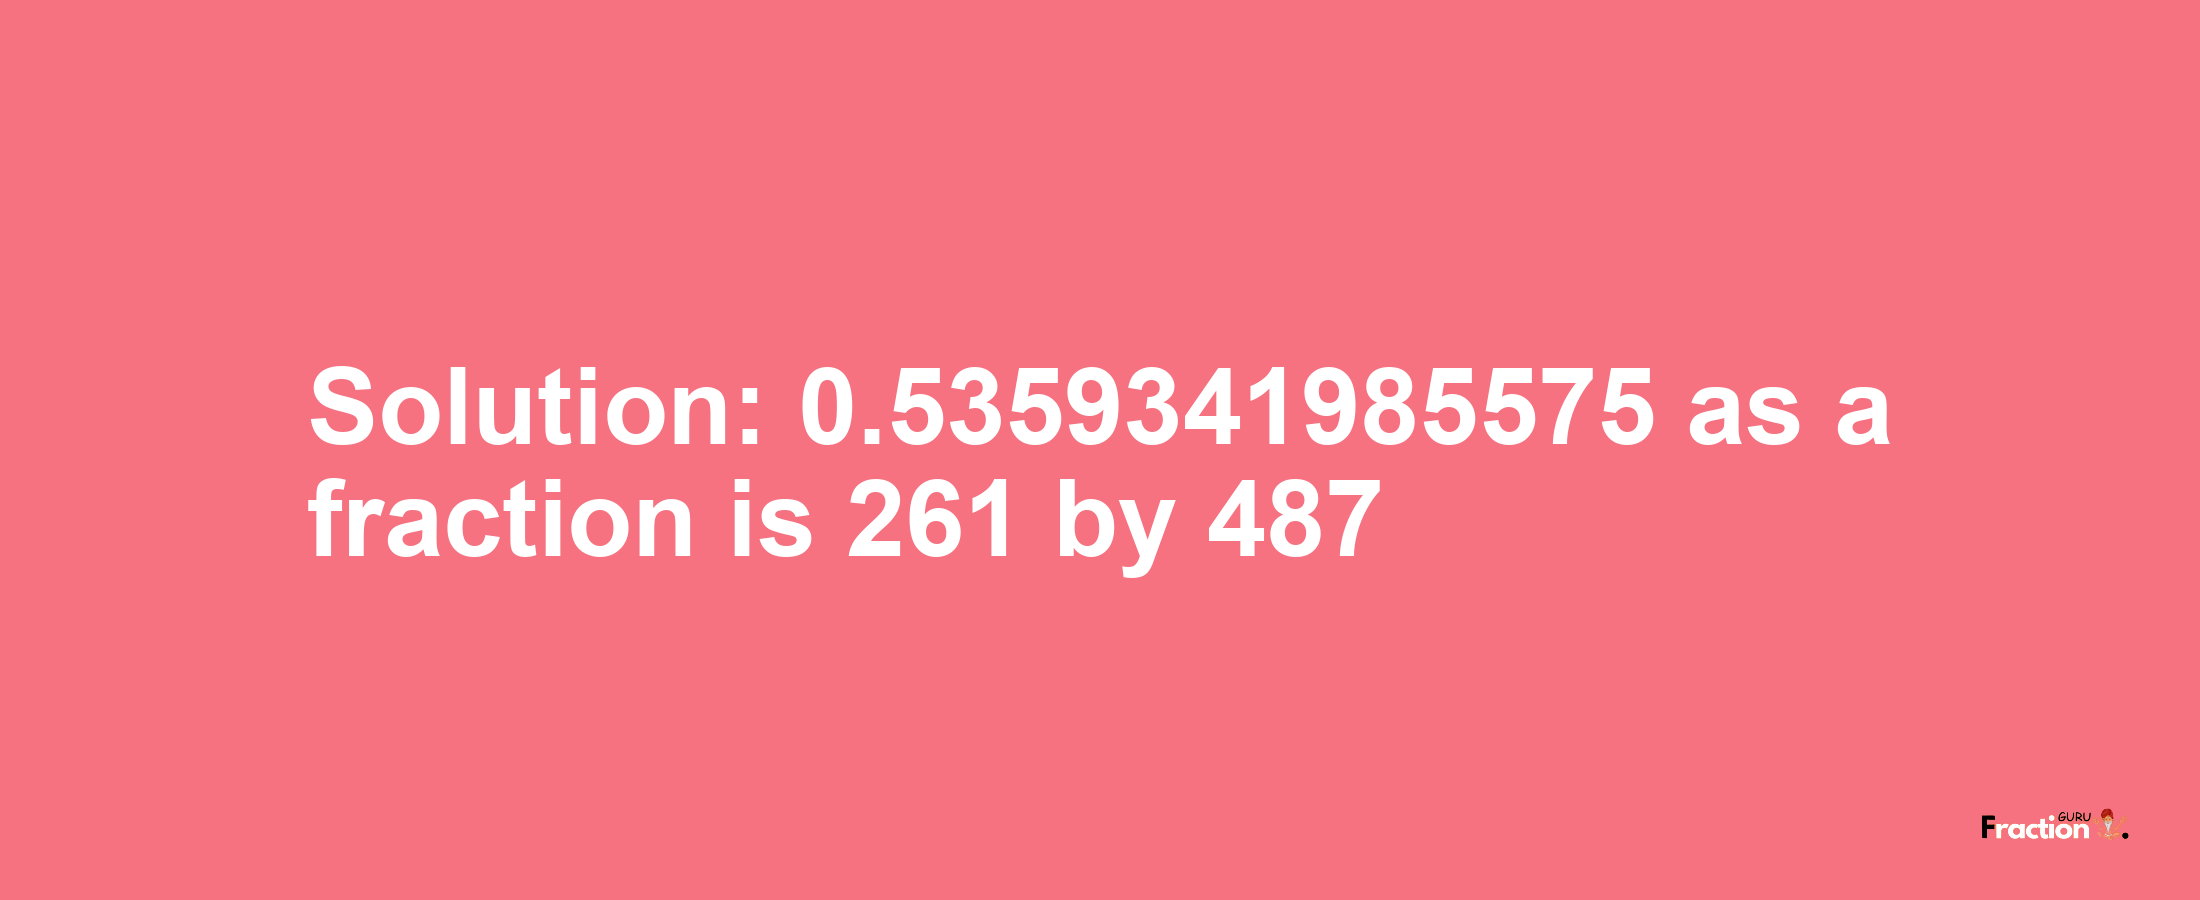 Solution:0.5359341985575 as a fraction is 261/487